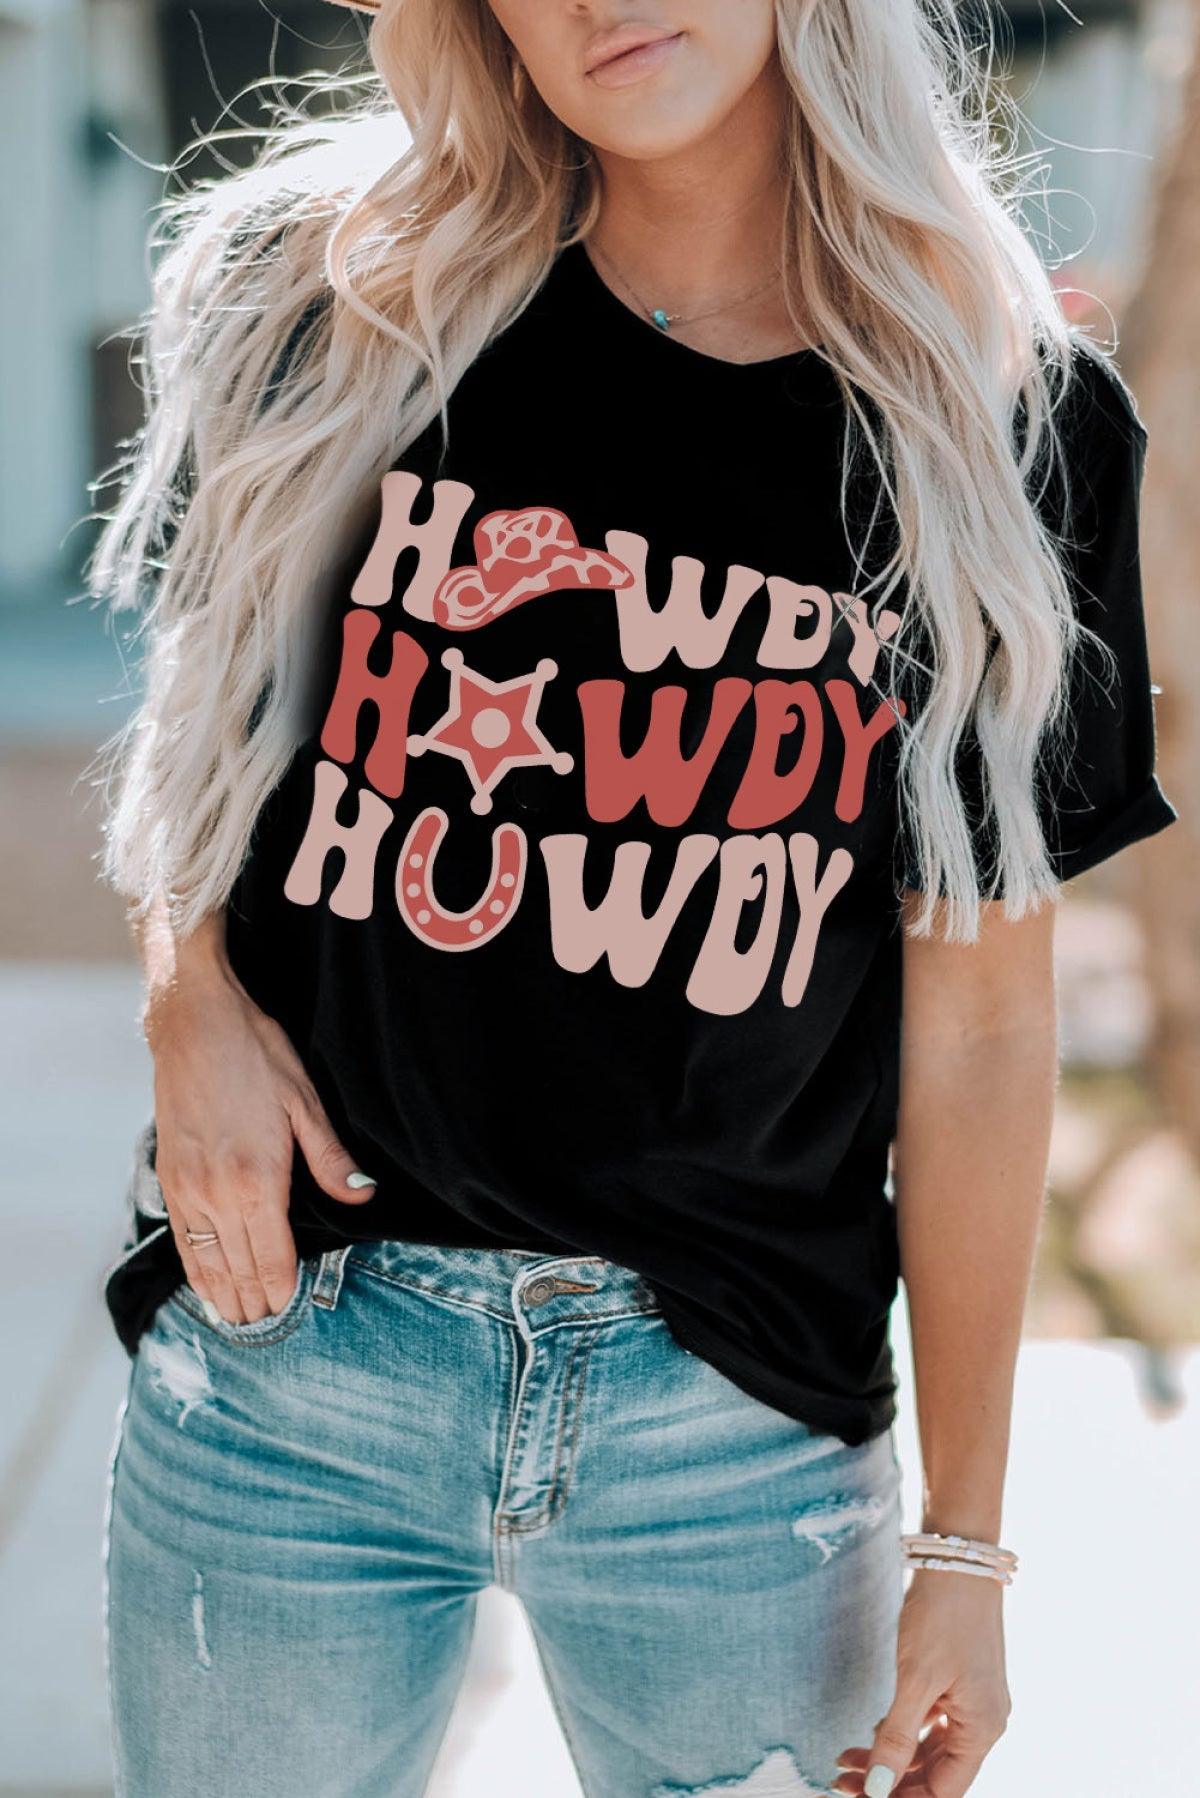 Get Your Hands on HOWDY Letter Graphic Tee for Women Today